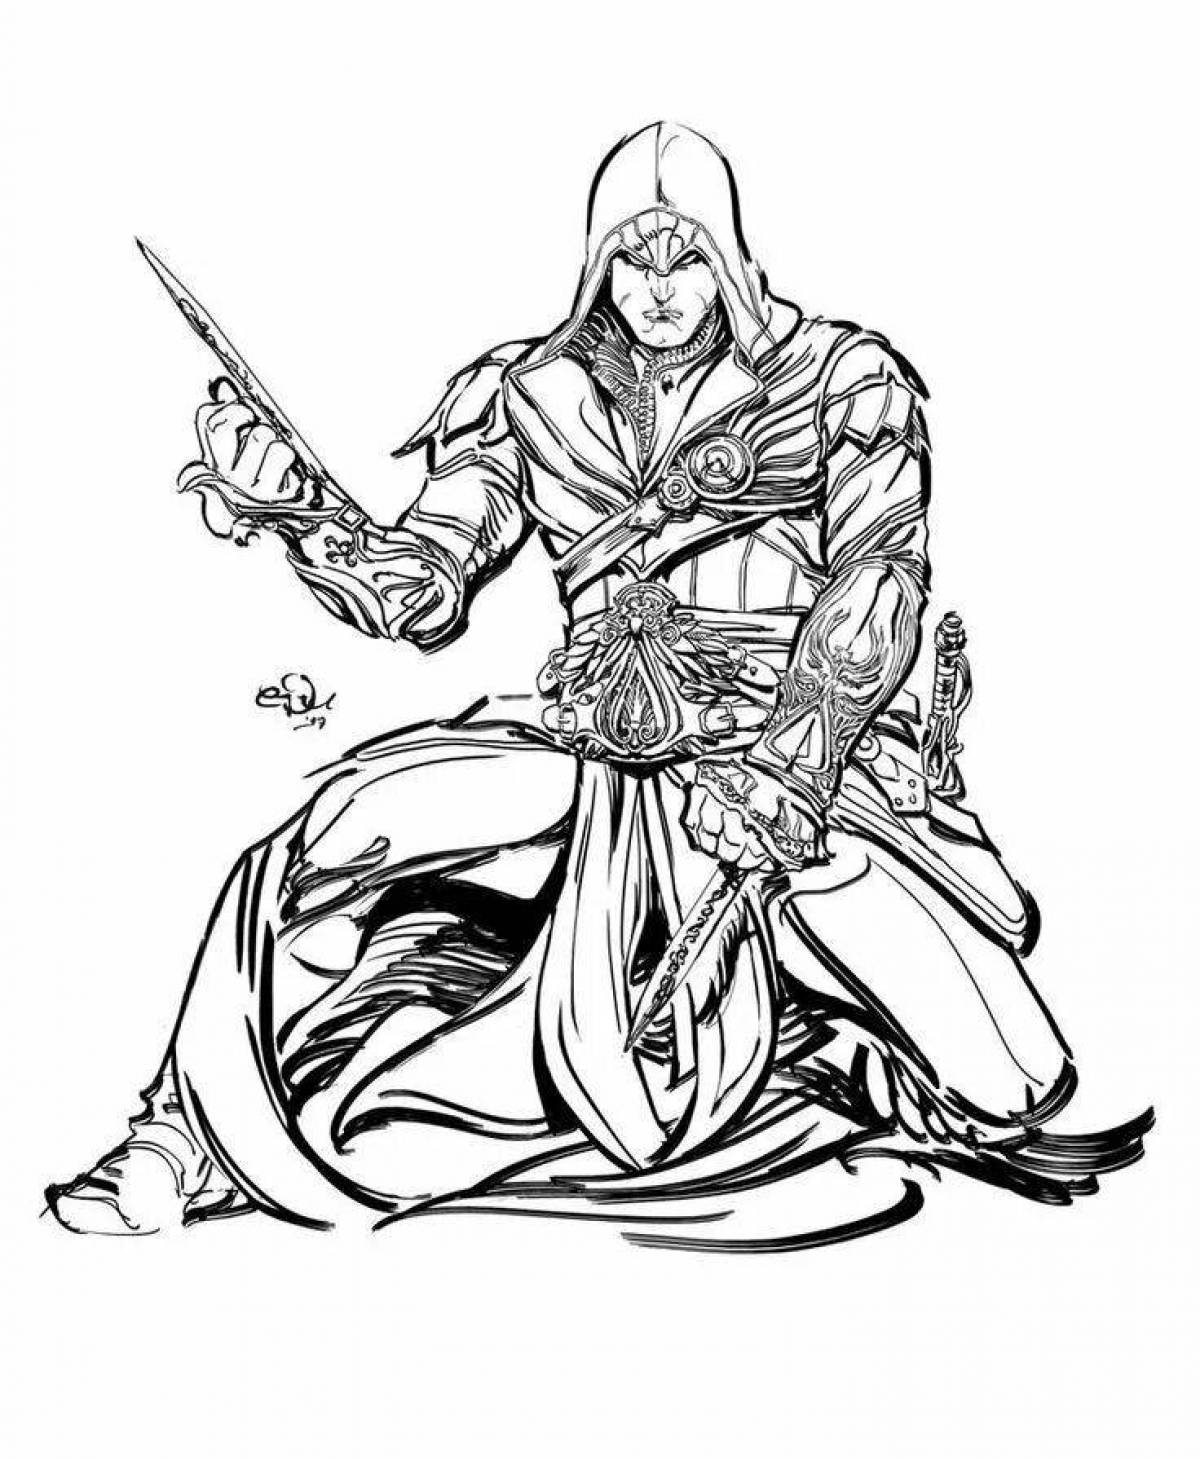 Radiant assassin's creed coloring page